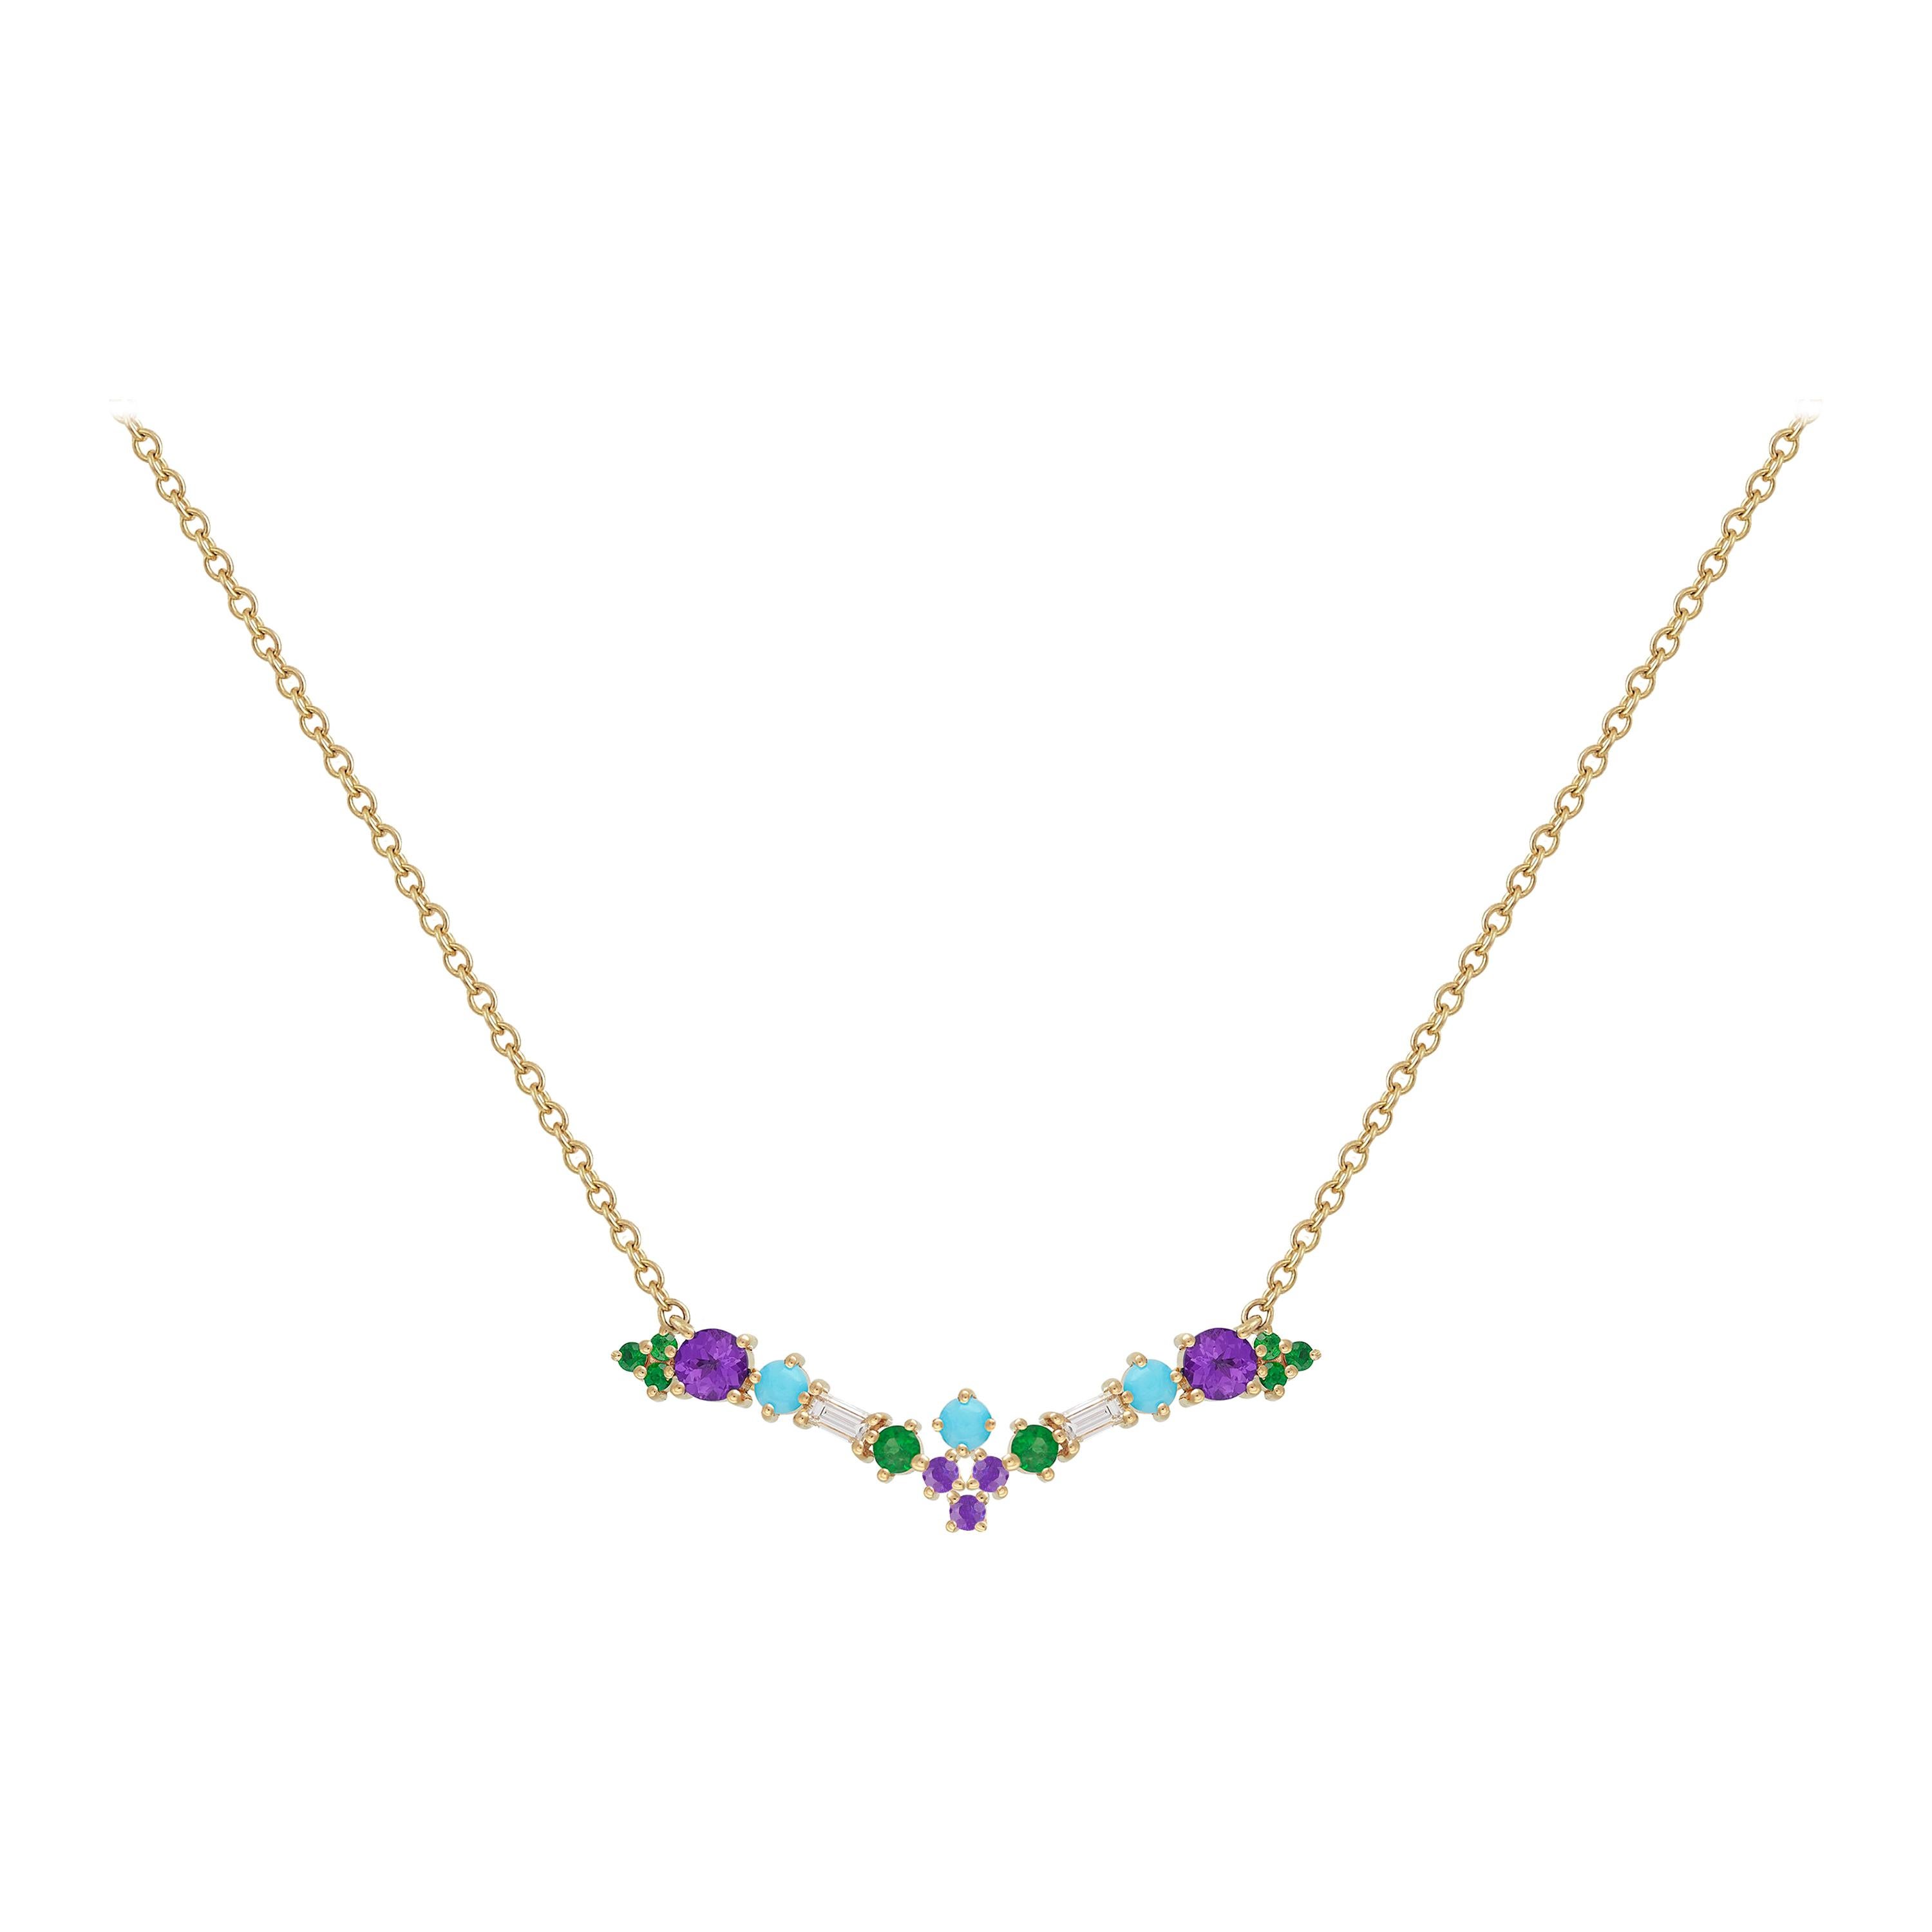 Colorful Necklace in 18kt Gold with Amethysts, Emeralds, Turquoise and Diamonds